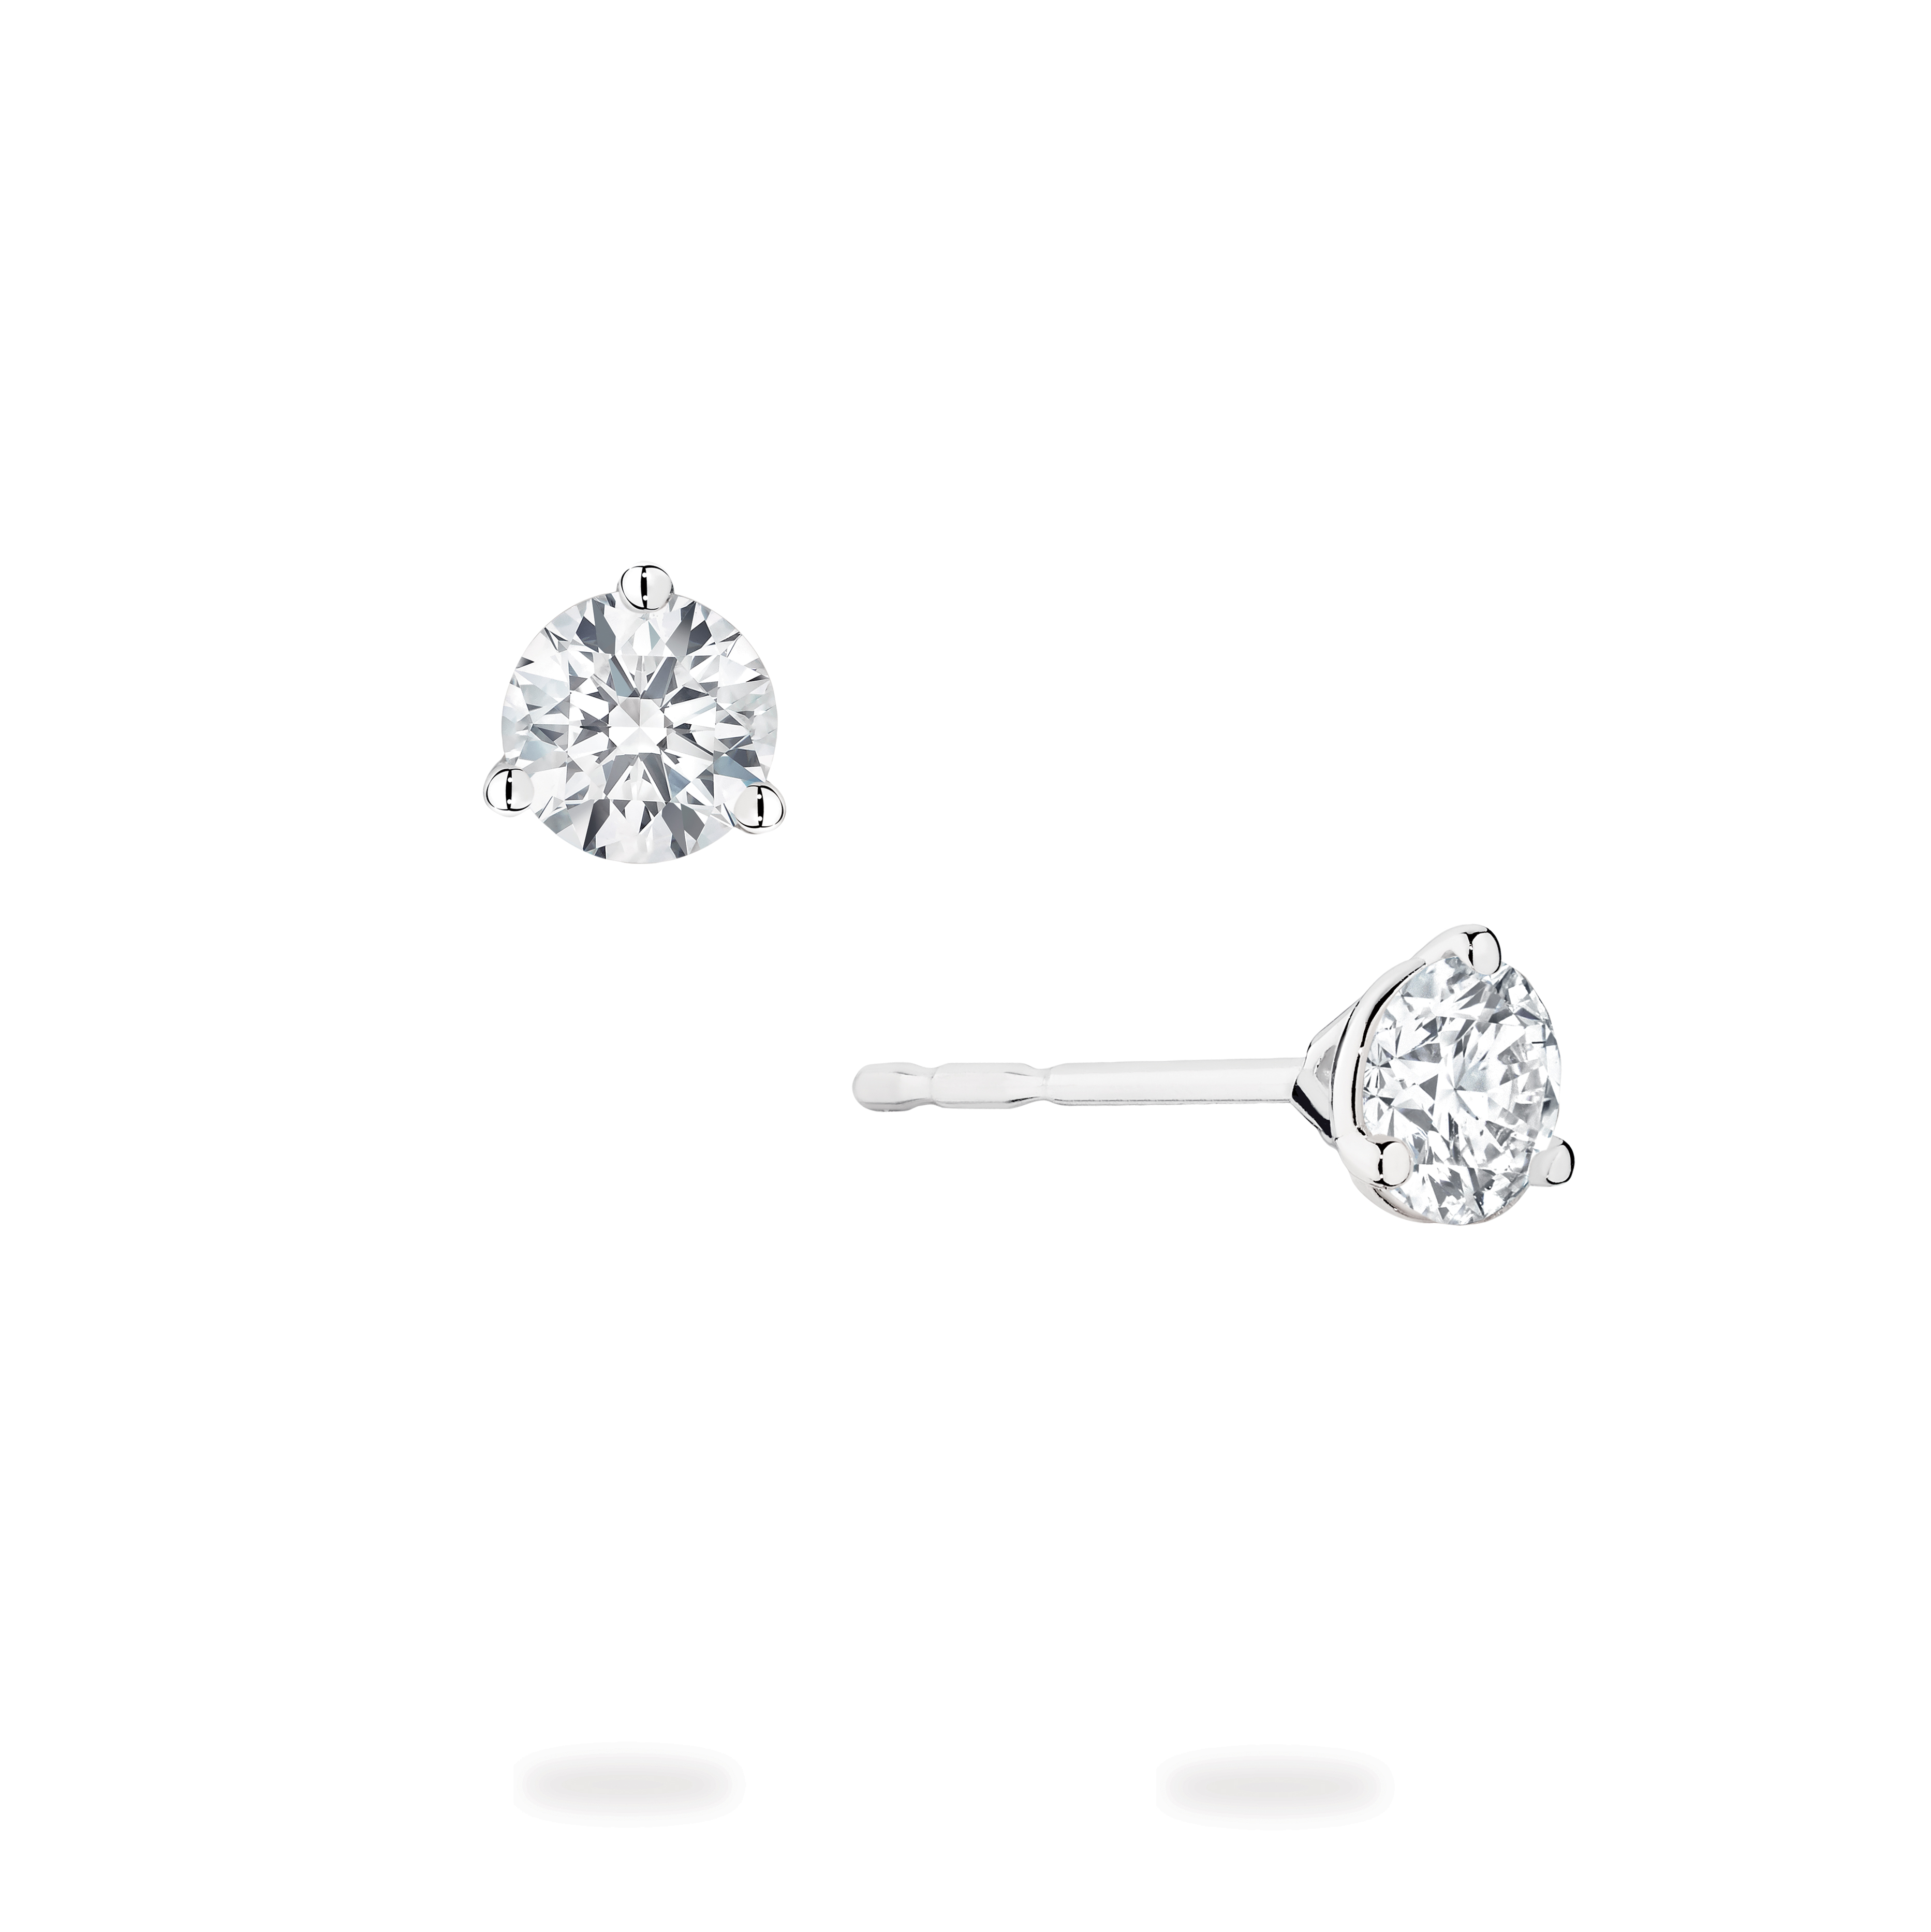 Round Cut 3-Prong Solitaire Diamond Earrings | Birks